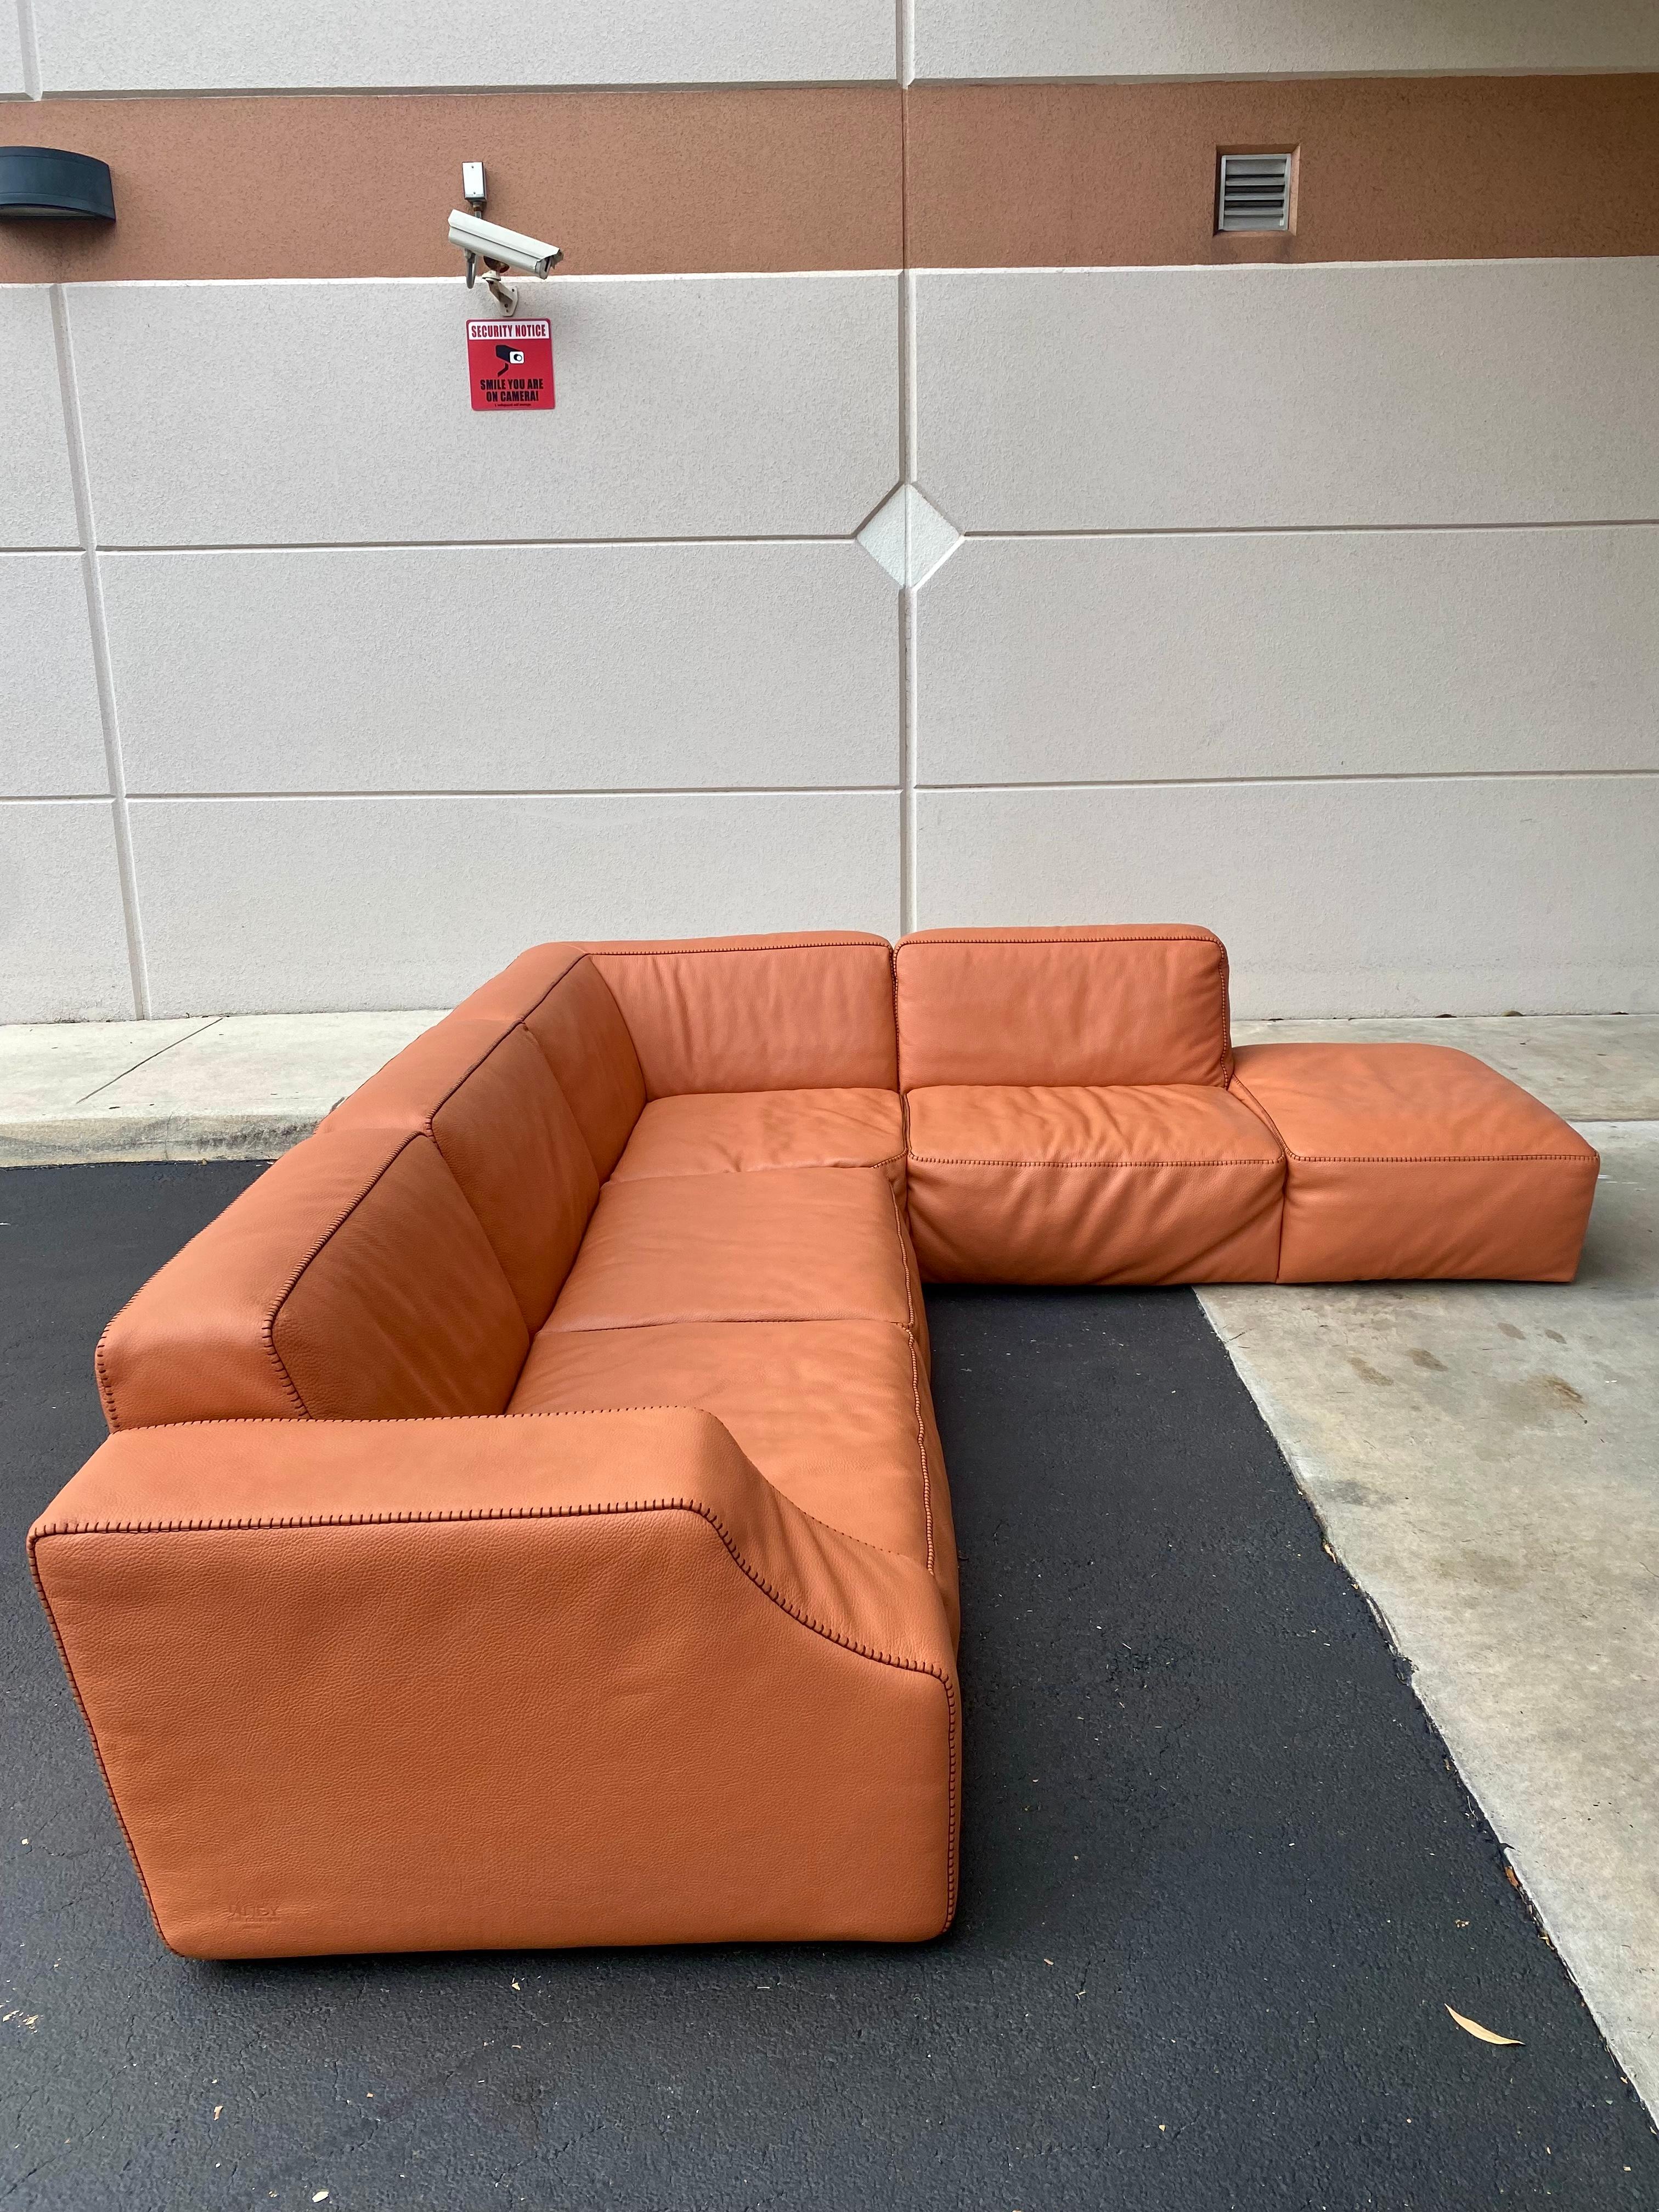 orange leather sectional couch